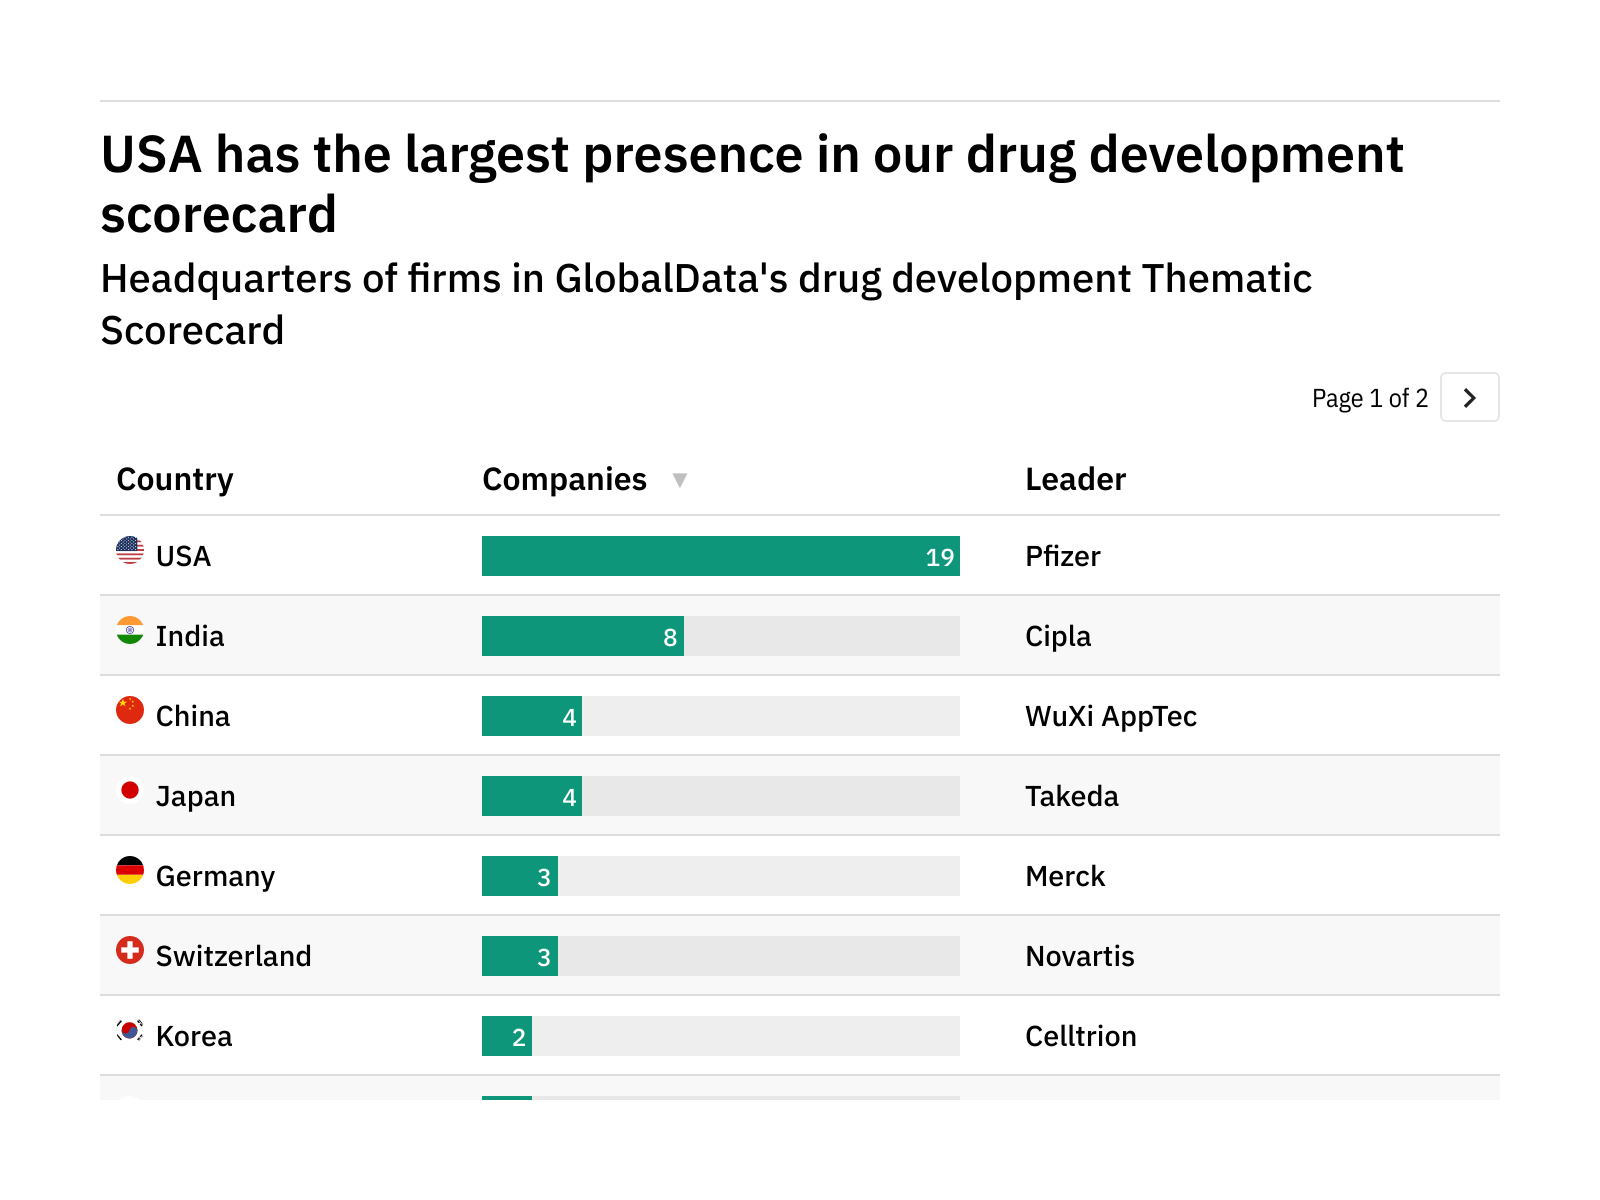 Revealed: drug development companies best positioned to weather future industry disruption